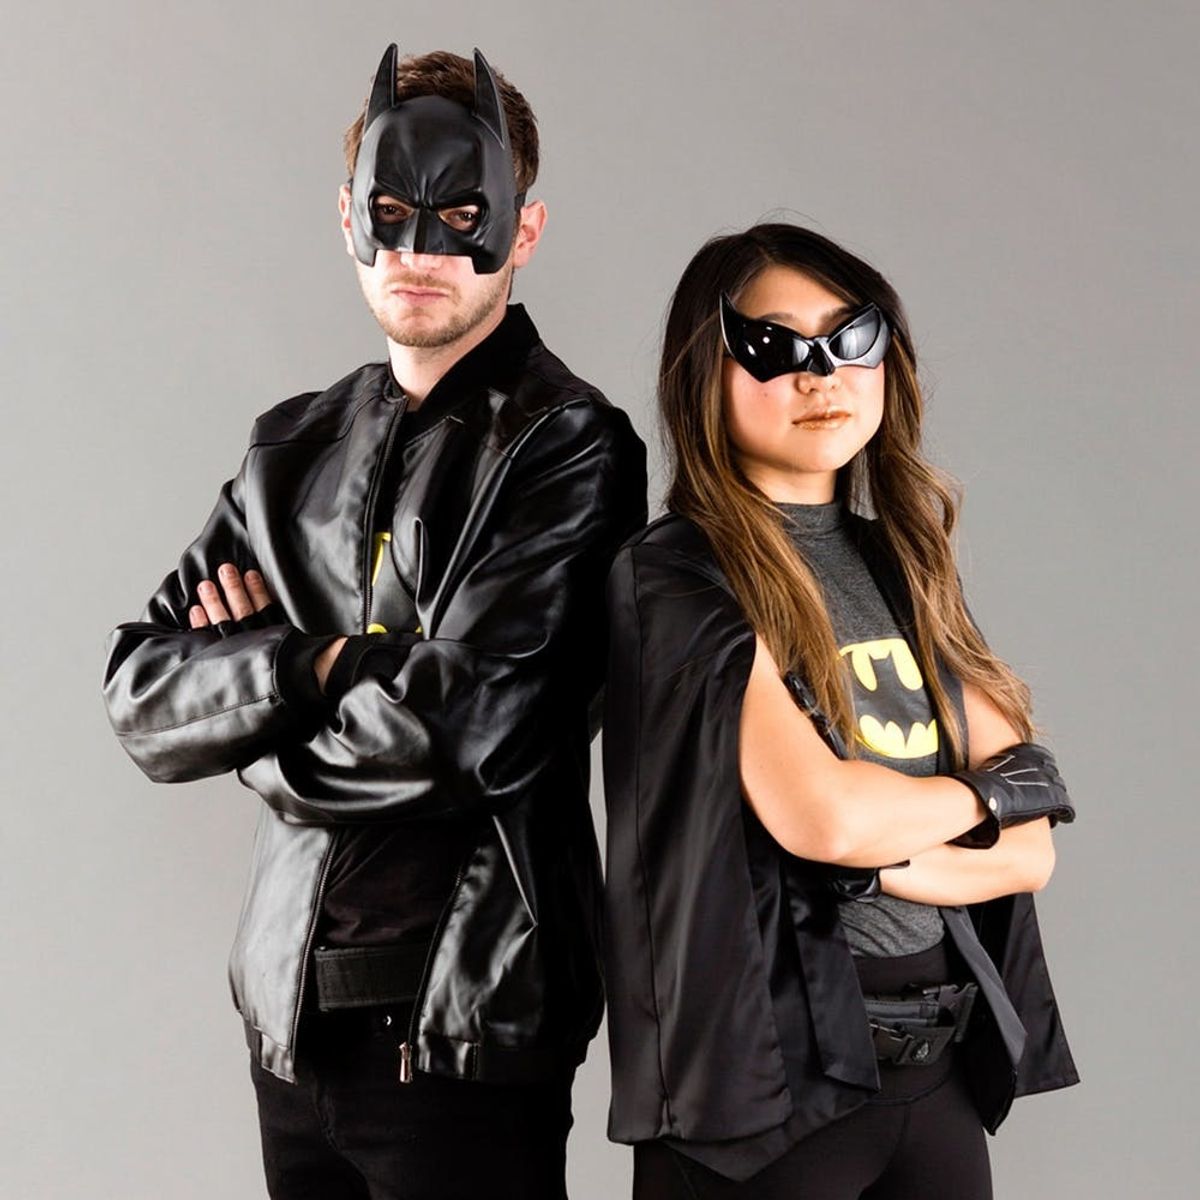 Save Gotham City With This Batman and Batgirl Couples Halloween Costume